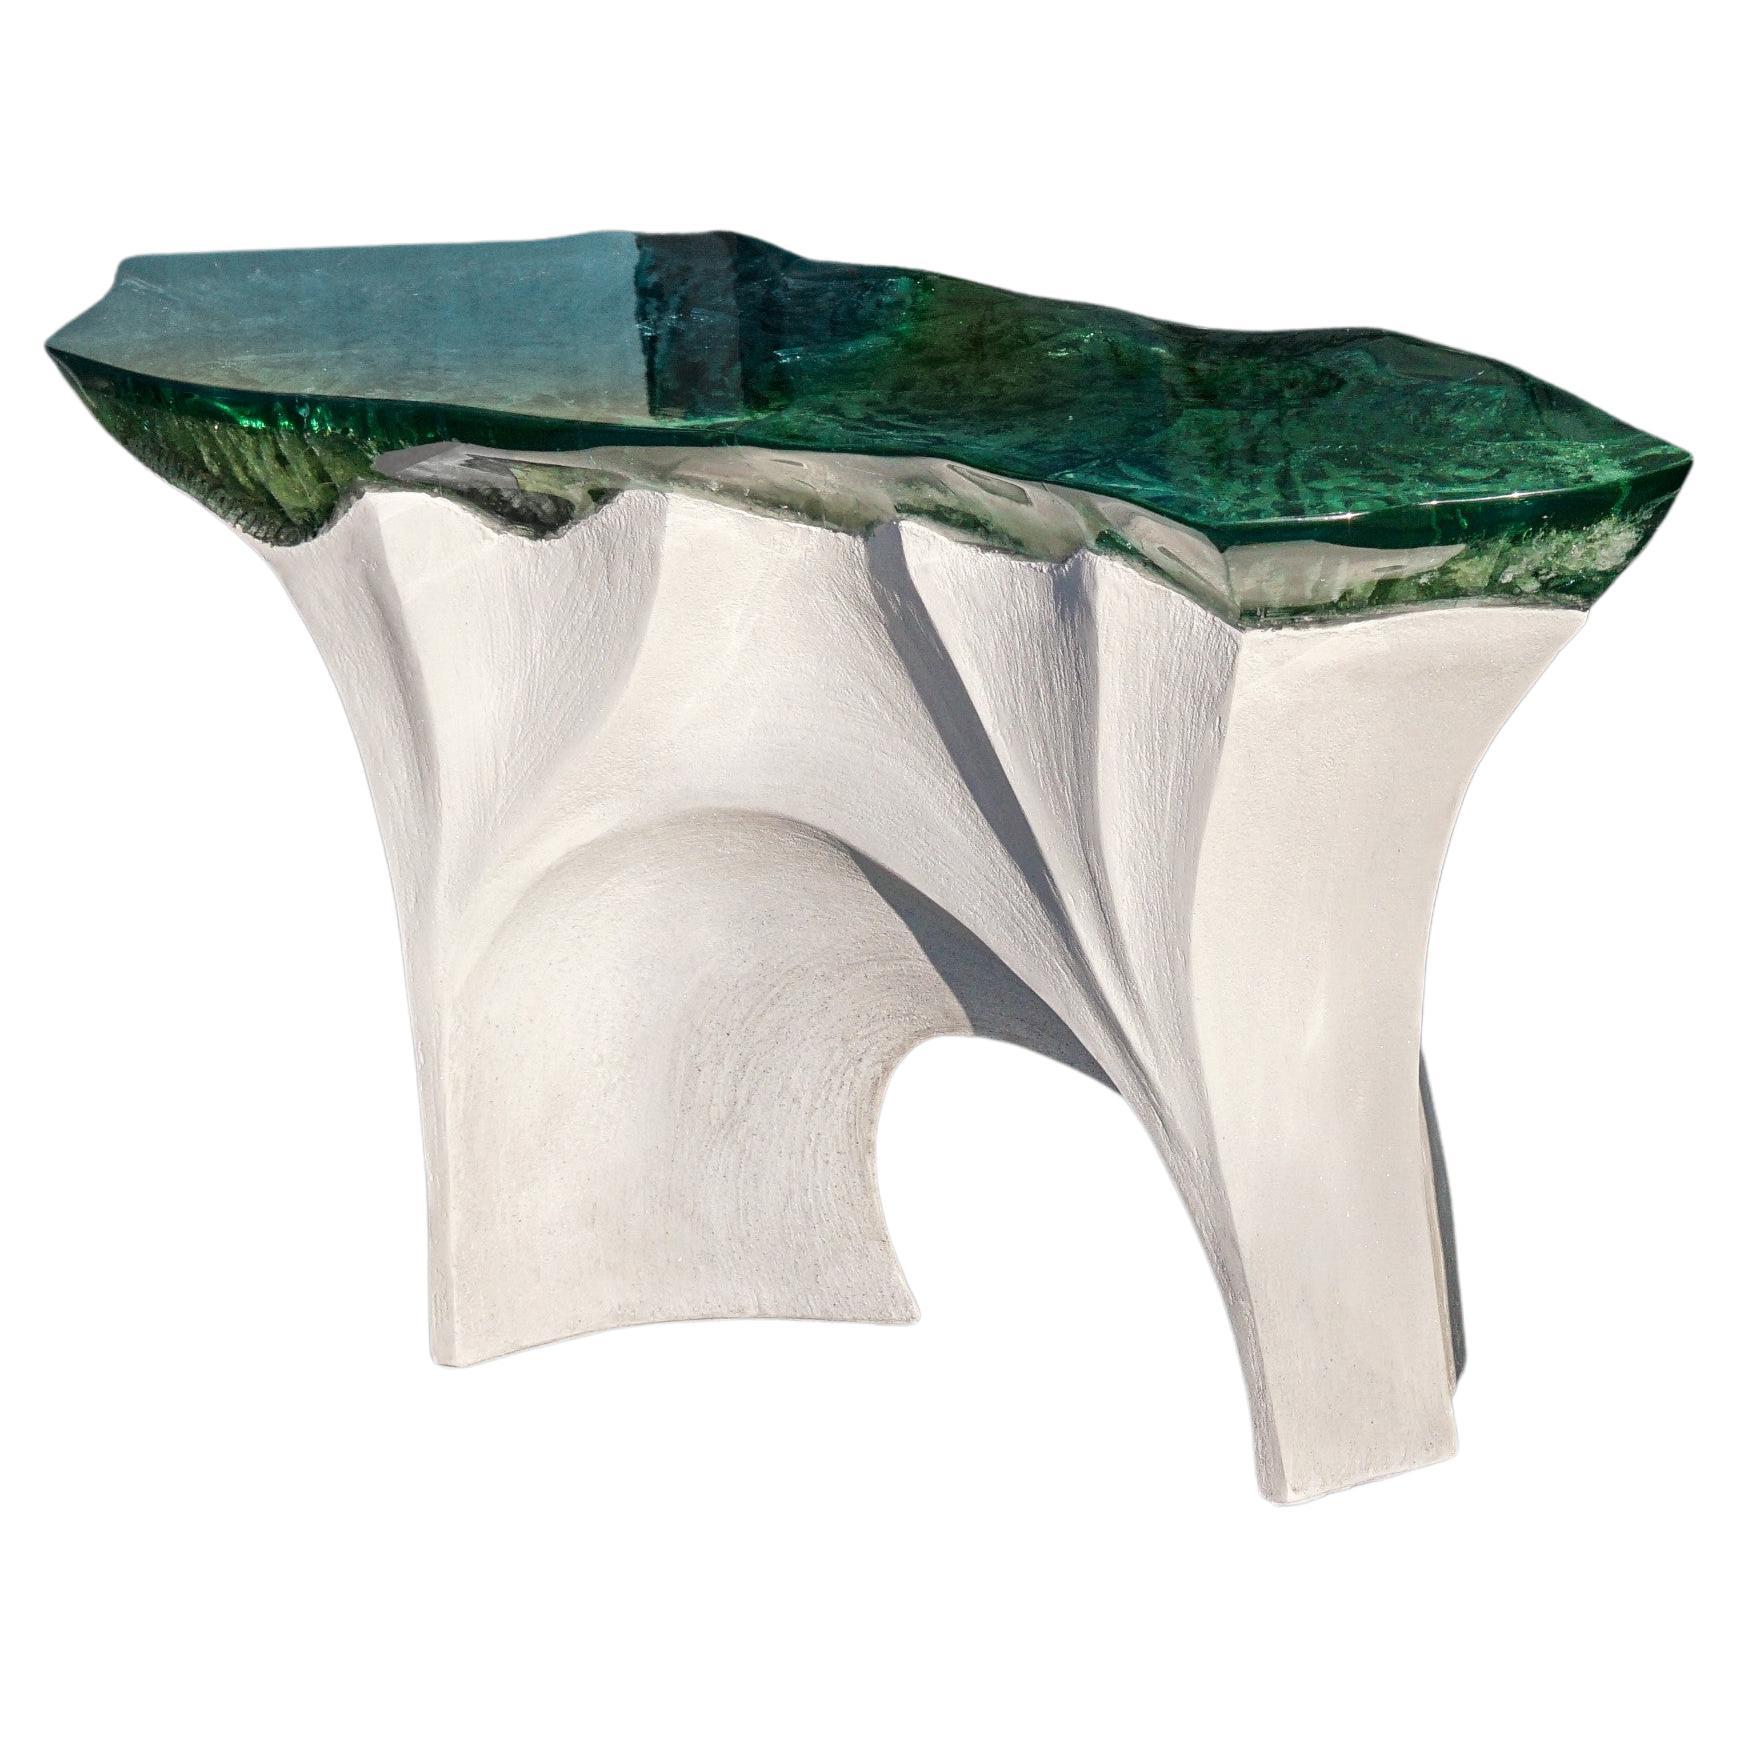 Eduard Locota Contemporary Console from Etretat Collectible Design Collection